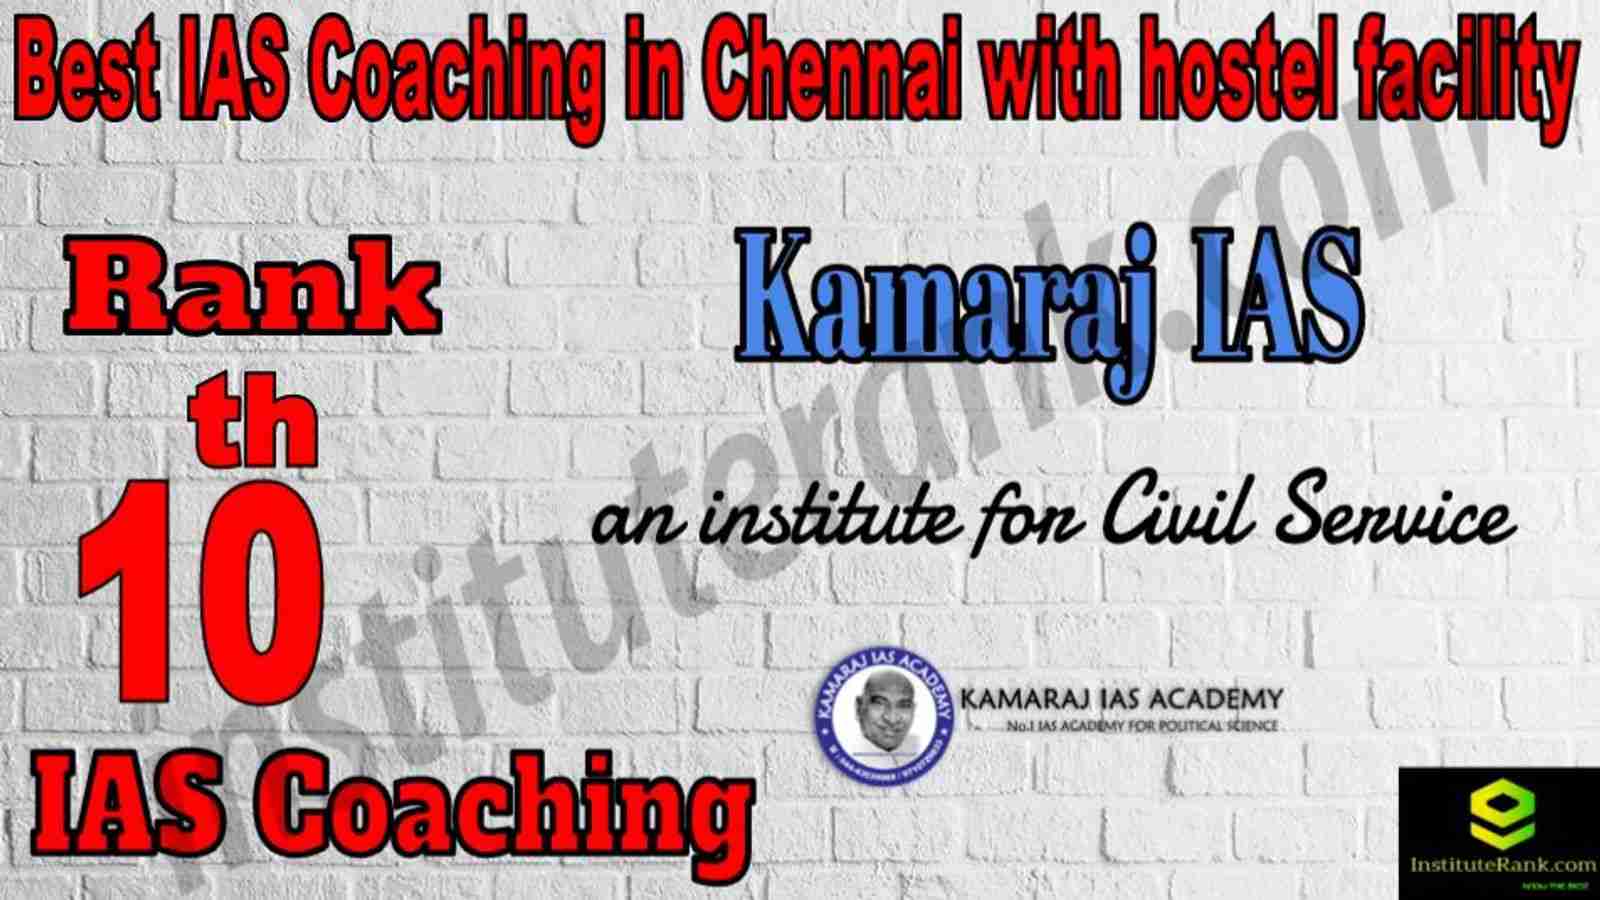 10th Best IAS Coaching in Chennai with hostel facility